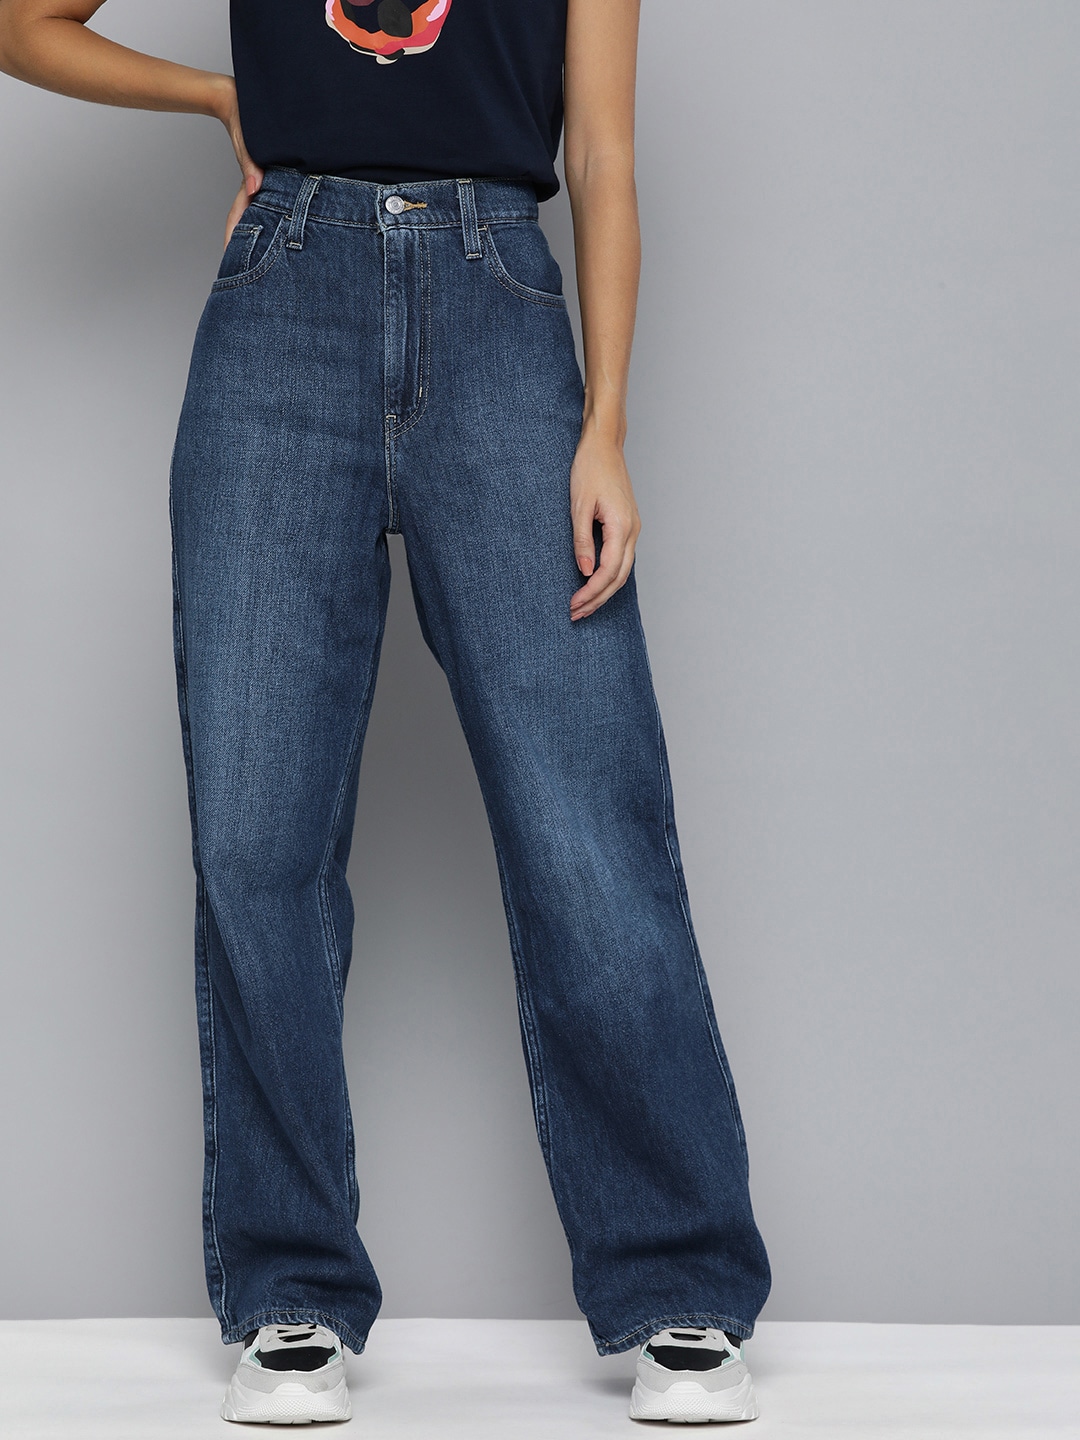 Levis Women Blue Straight Fit High-Rise Light Fade Clean Look Jeans Price in India